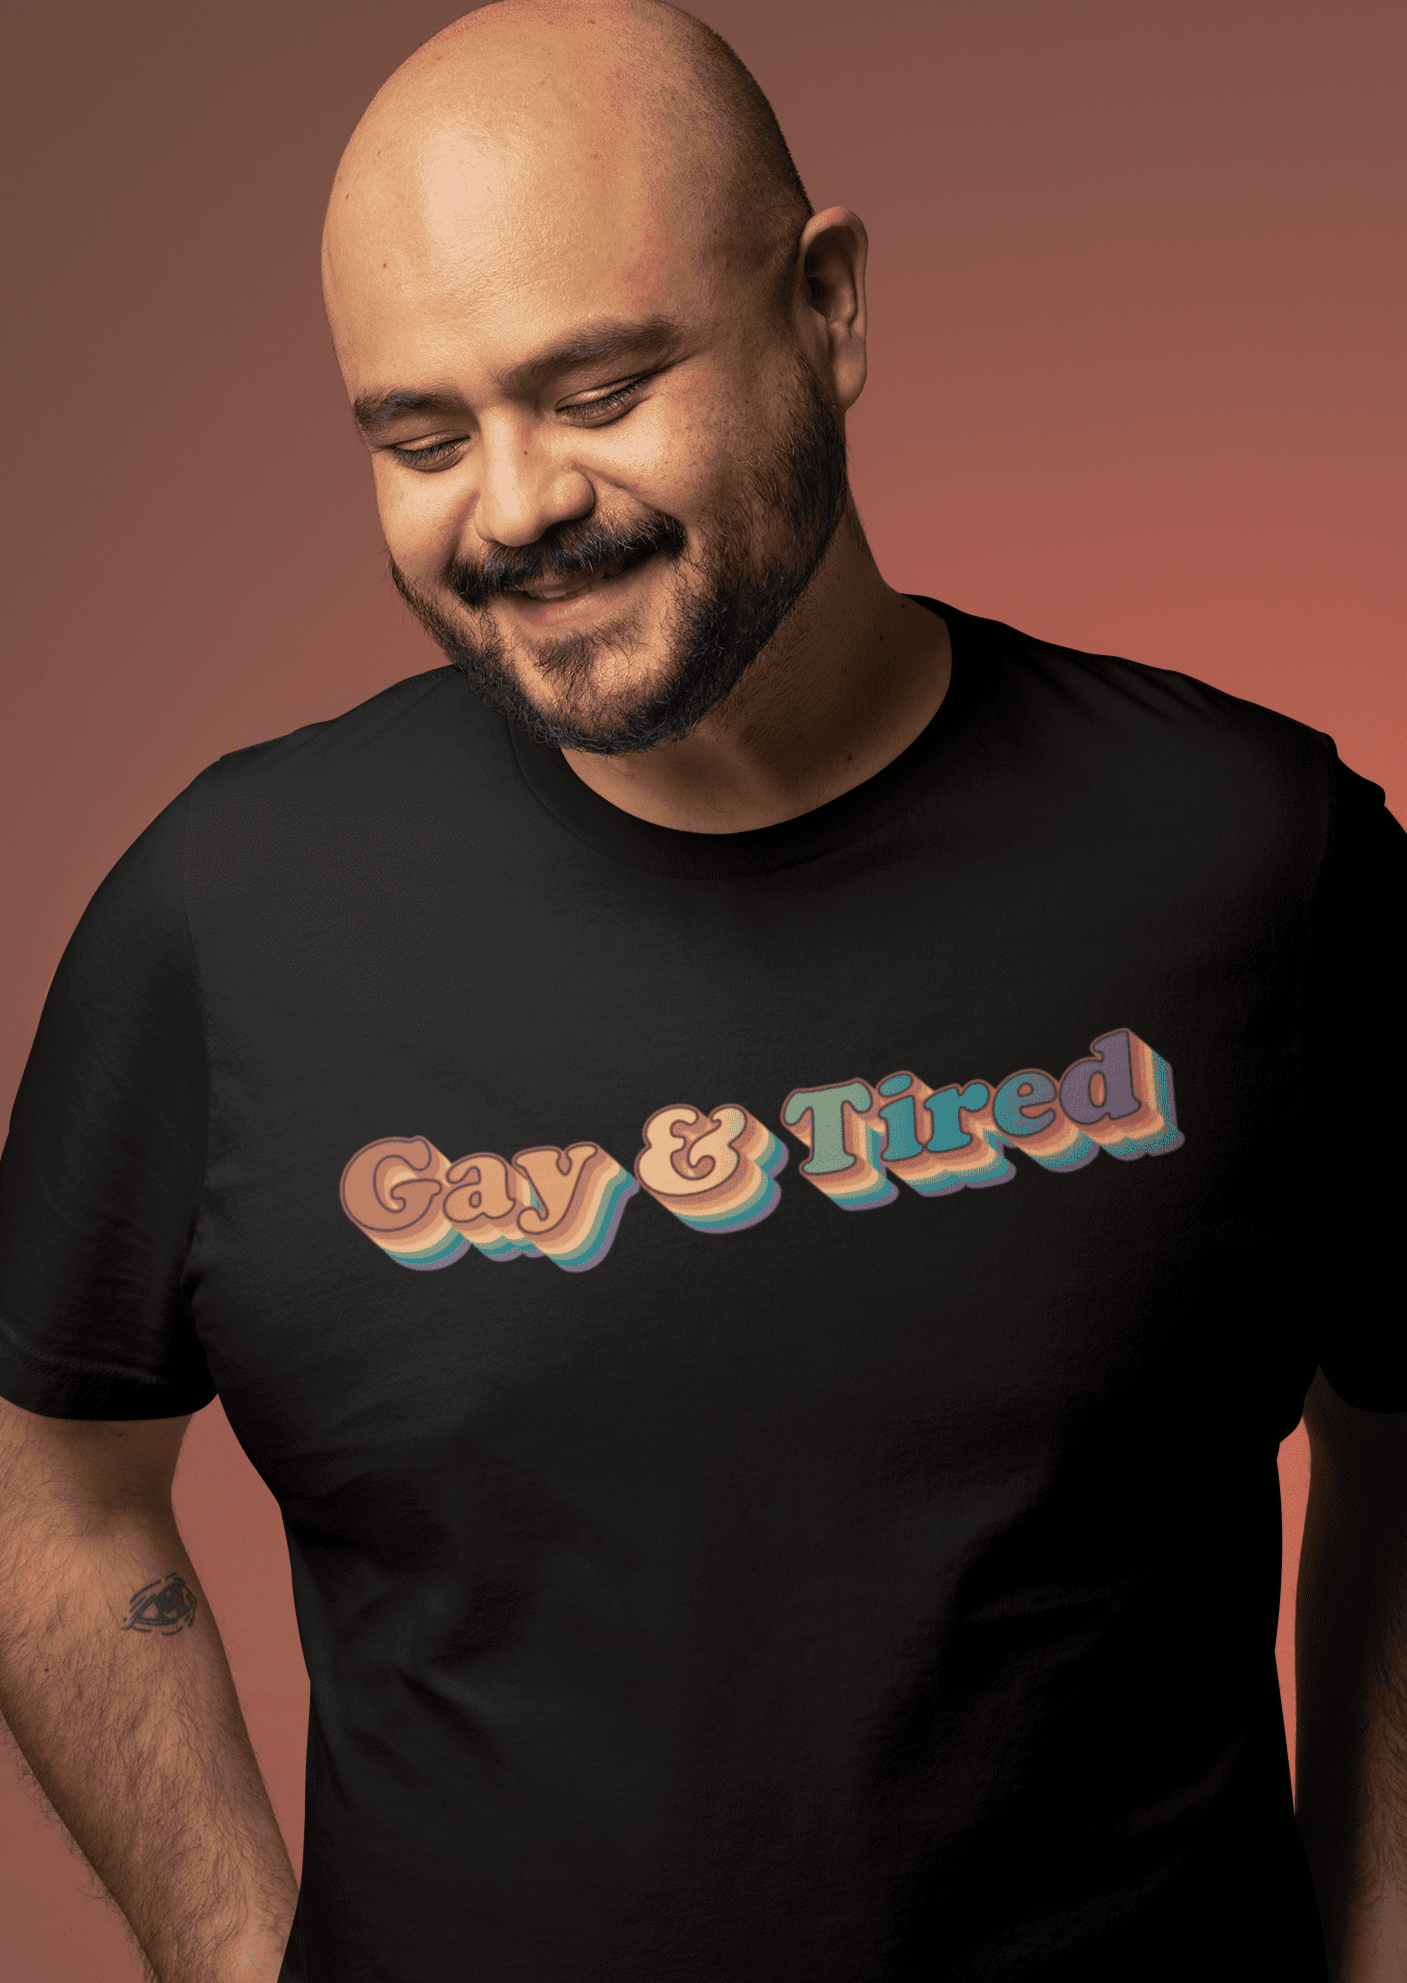 Gay and tired t-shirt in a retro look